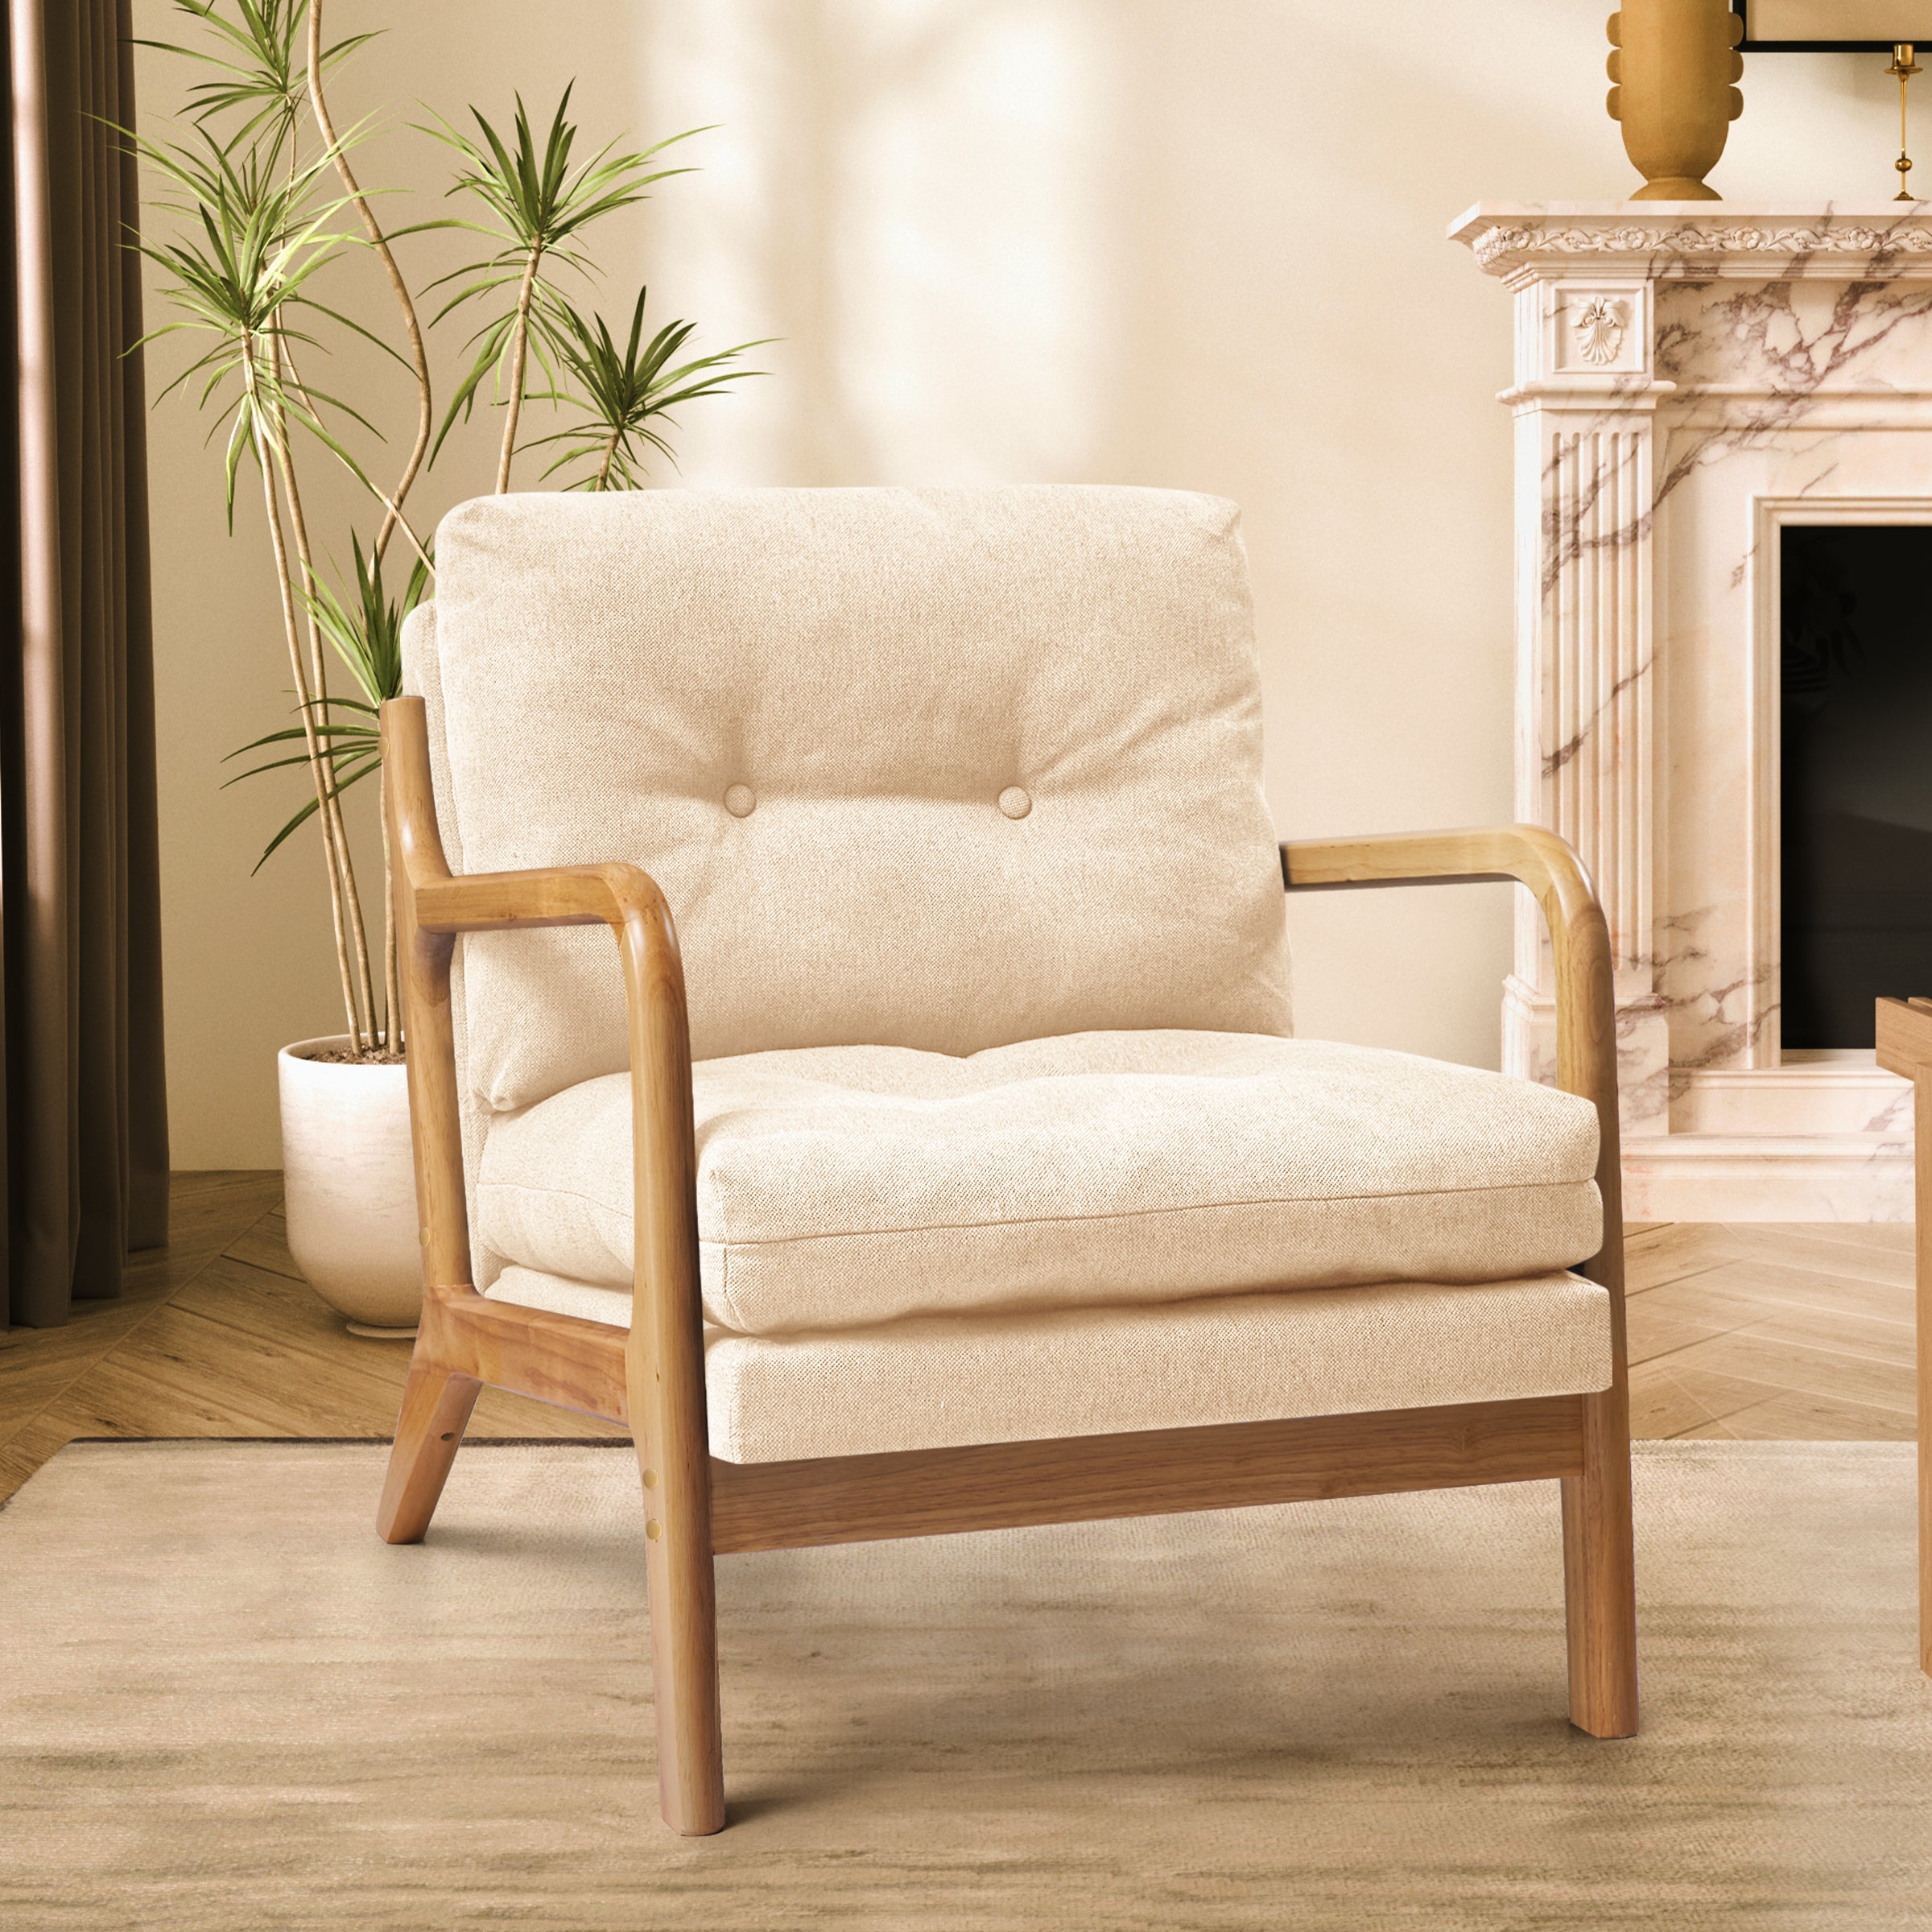 Cloud Comfort Cushion with Wooden Armrest Accent Chair